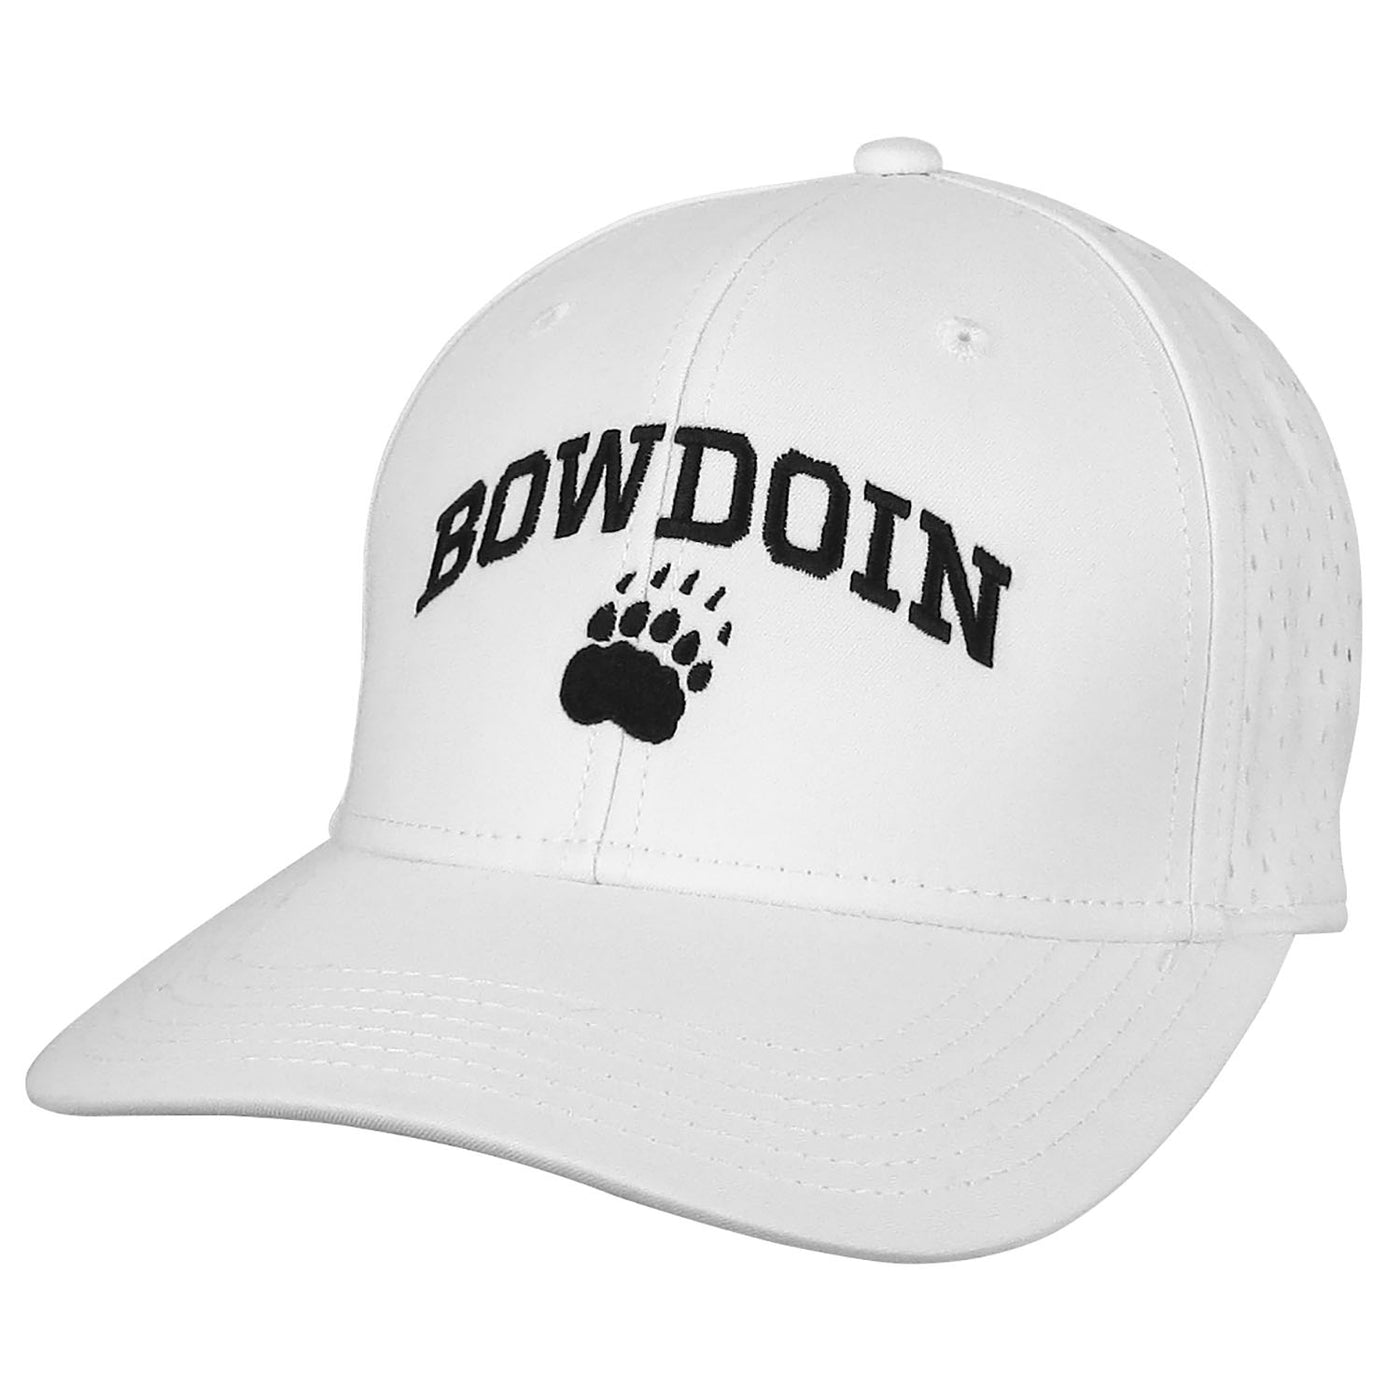 Reclaim Mid-Pro Hat with Bowdoin and Paw from Legacy – The Bowdoin Store